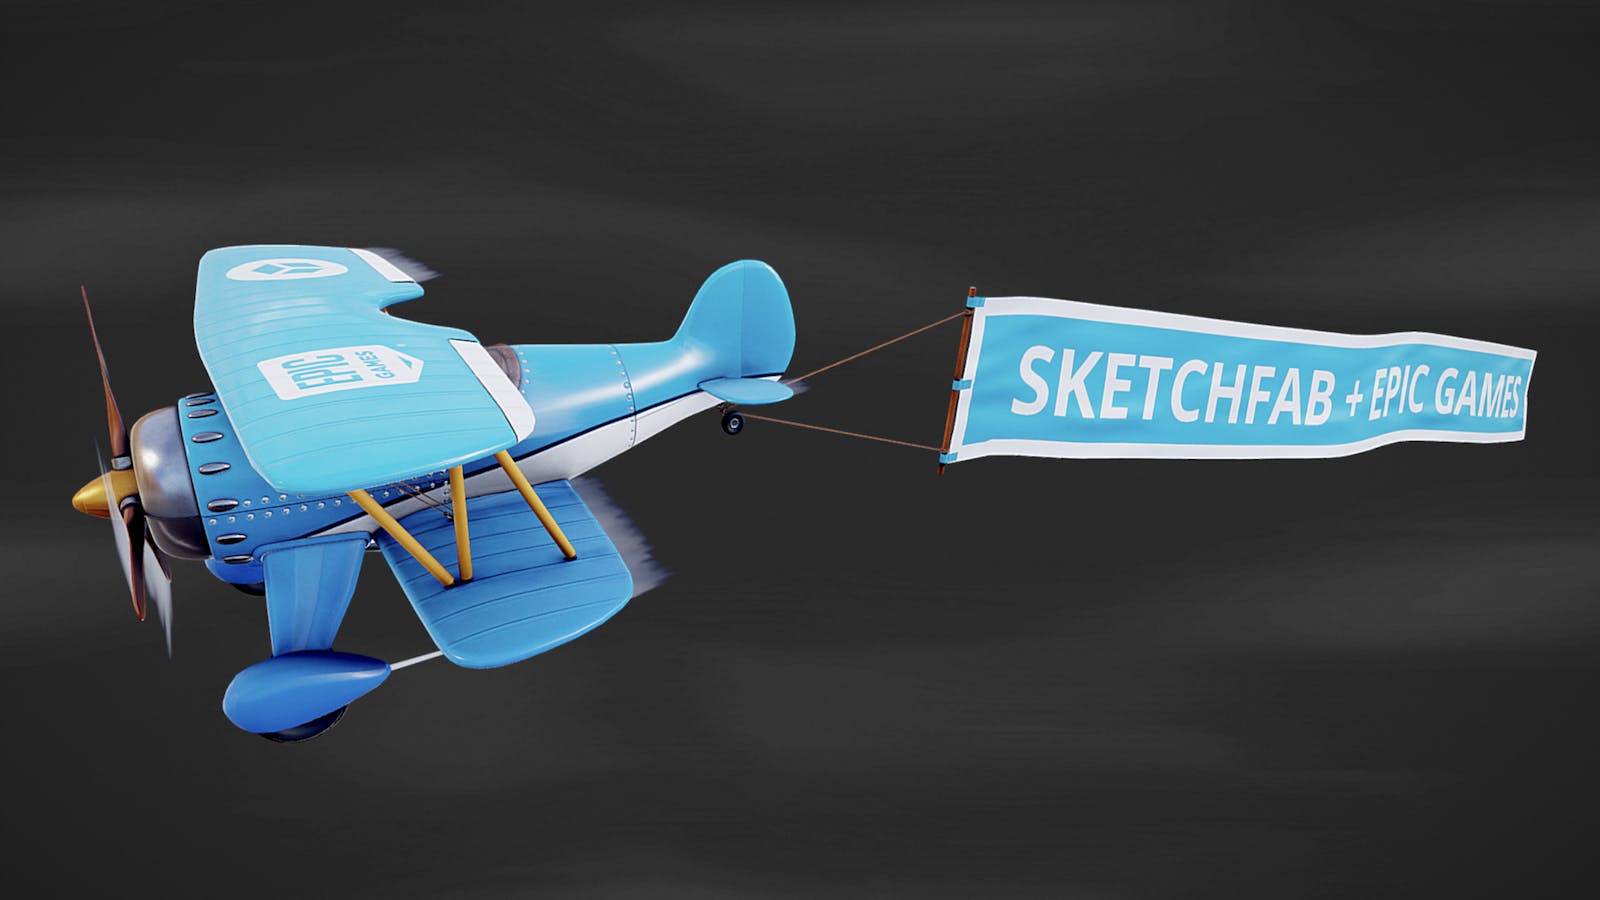 How SketchFab announced it was being acquired by Epic Games. Image by SketchFab